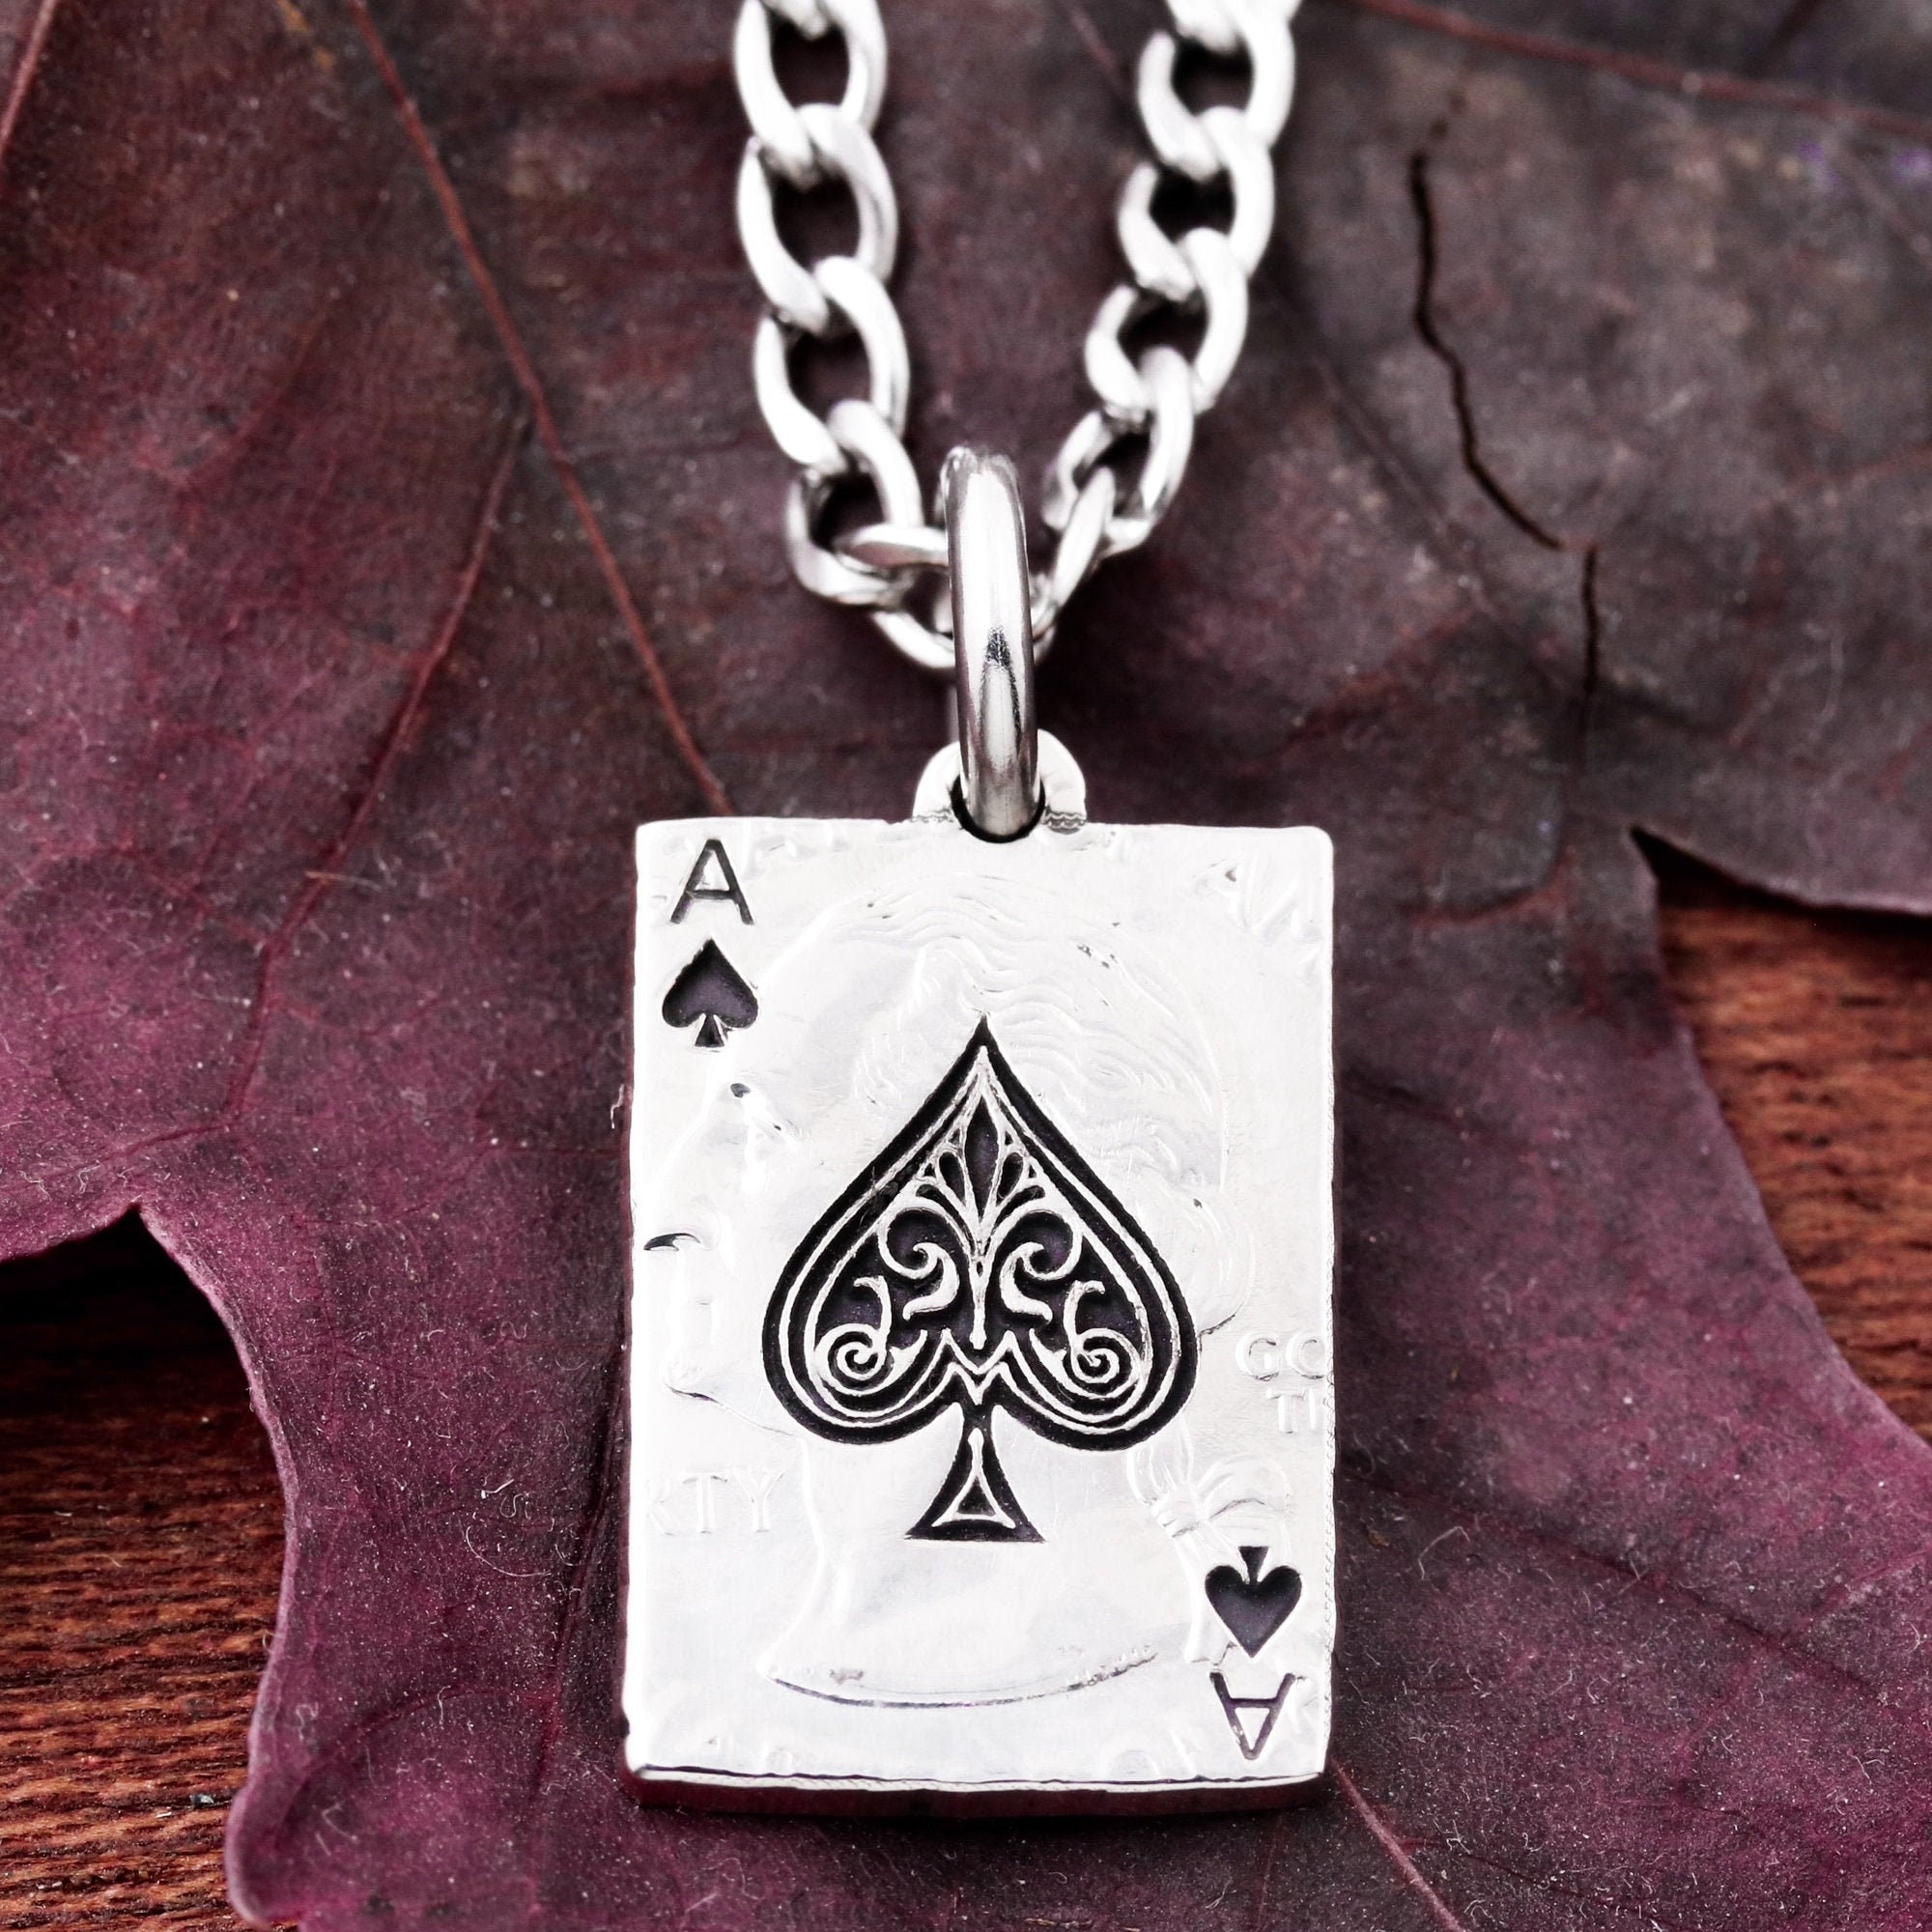 Buy Sketched Design of Ace of Spades, Engraved Spade Necklace, Playing Card  Design, Hand Cut Coin Online in India - Etsy